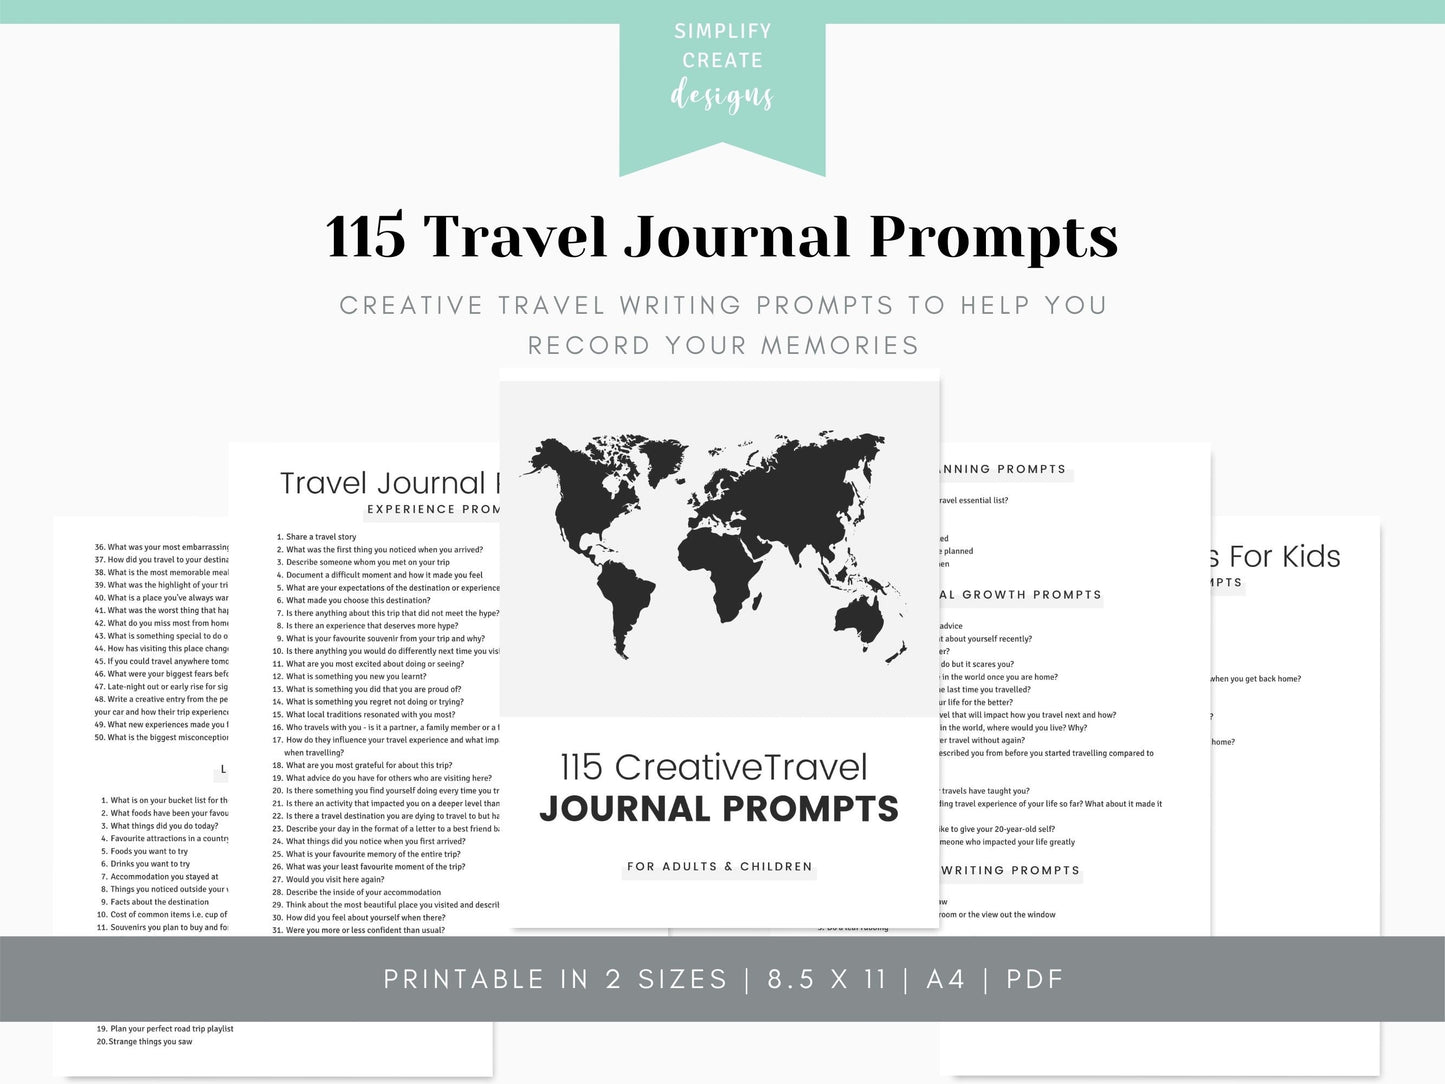 Travel Journal Prompts - Simplify Create Inspire